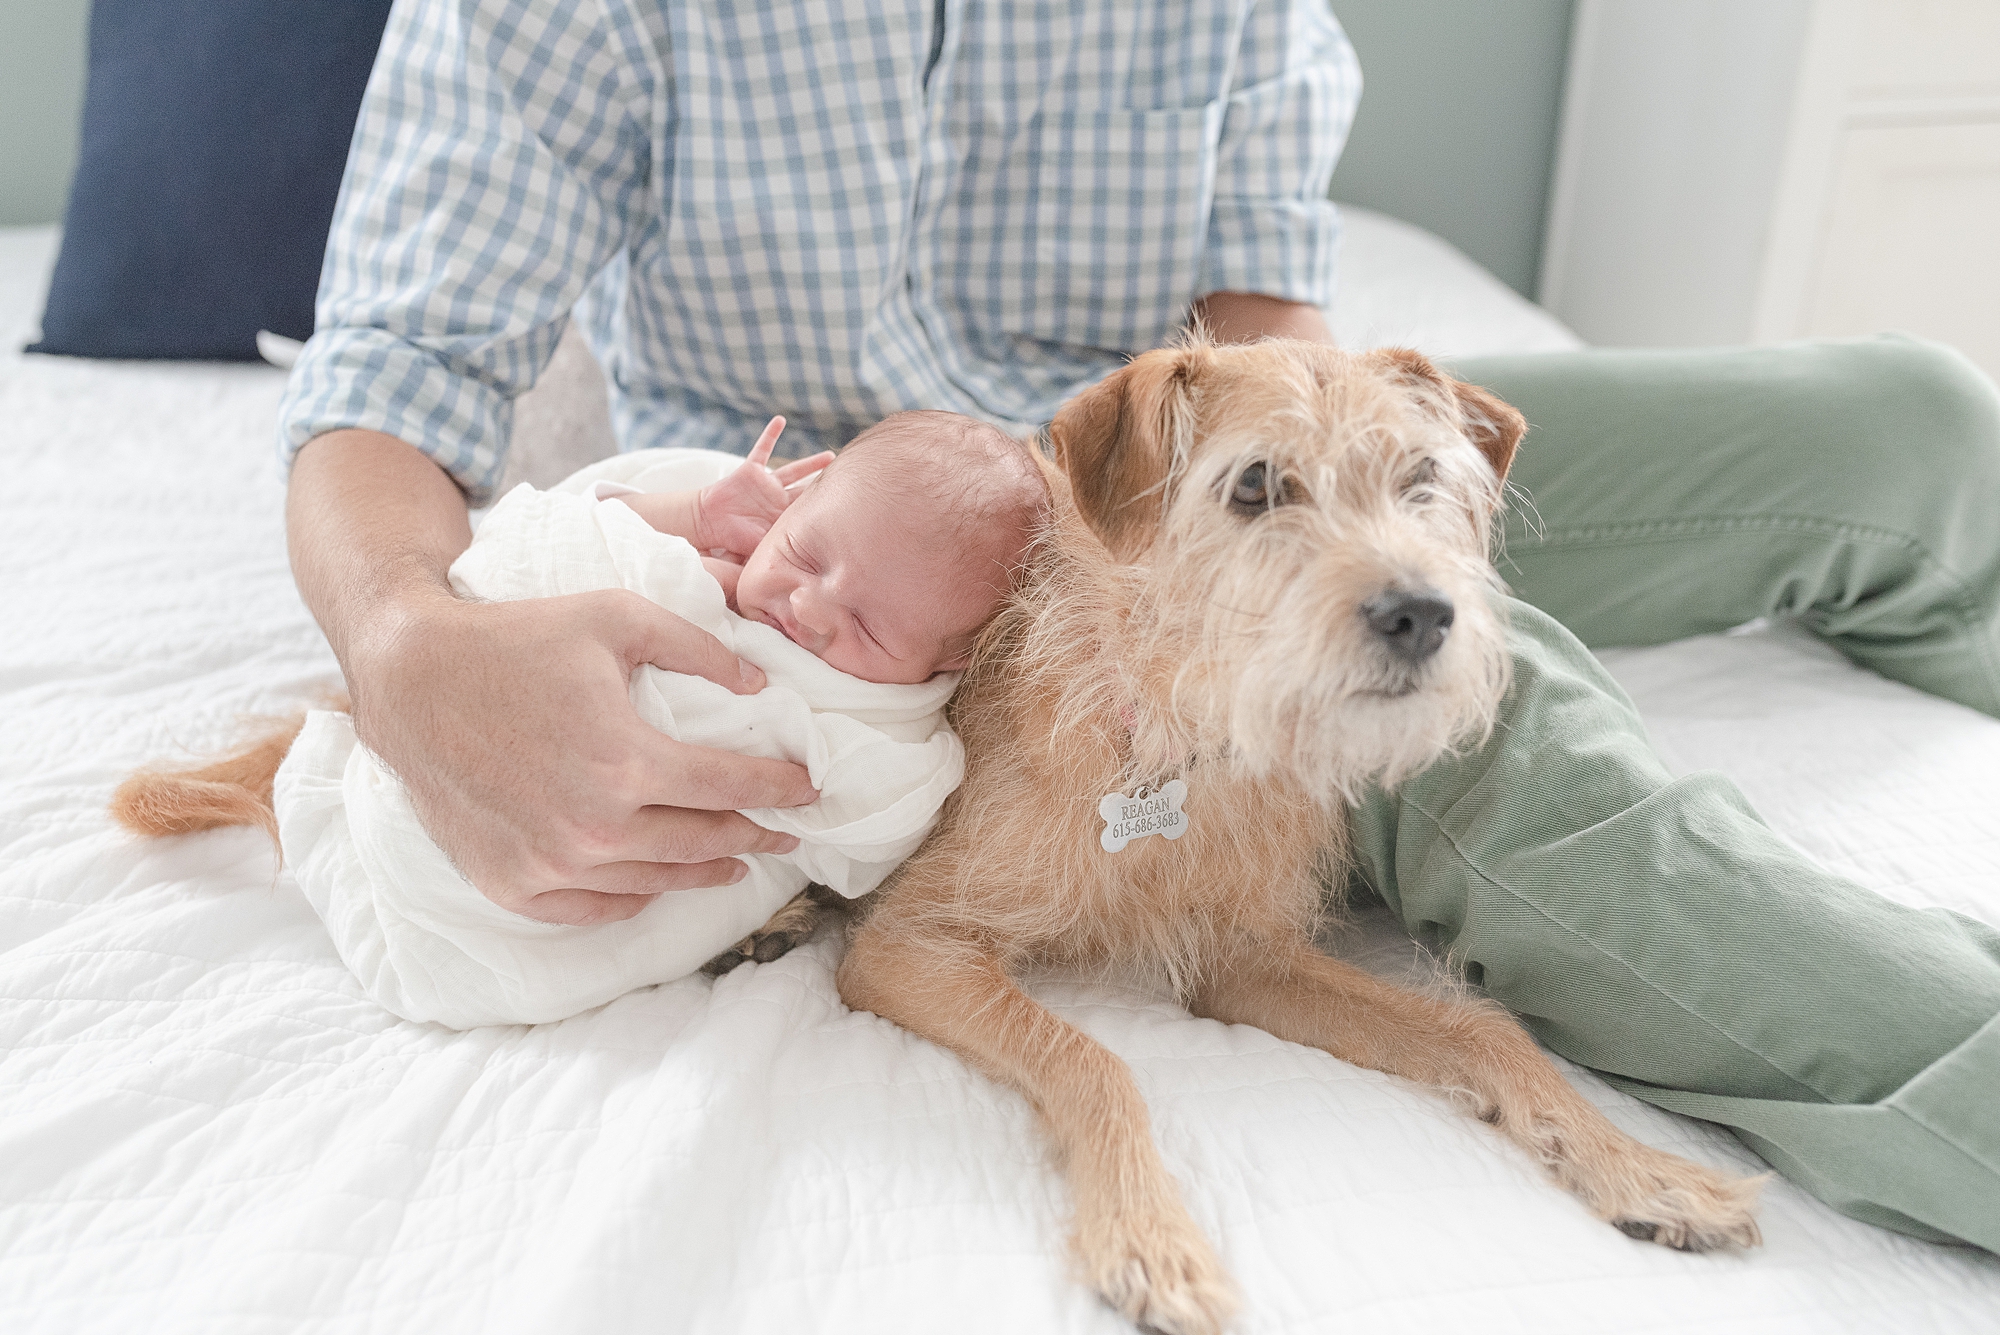 Dog is reluctantly sitting next to a newborn baby girl